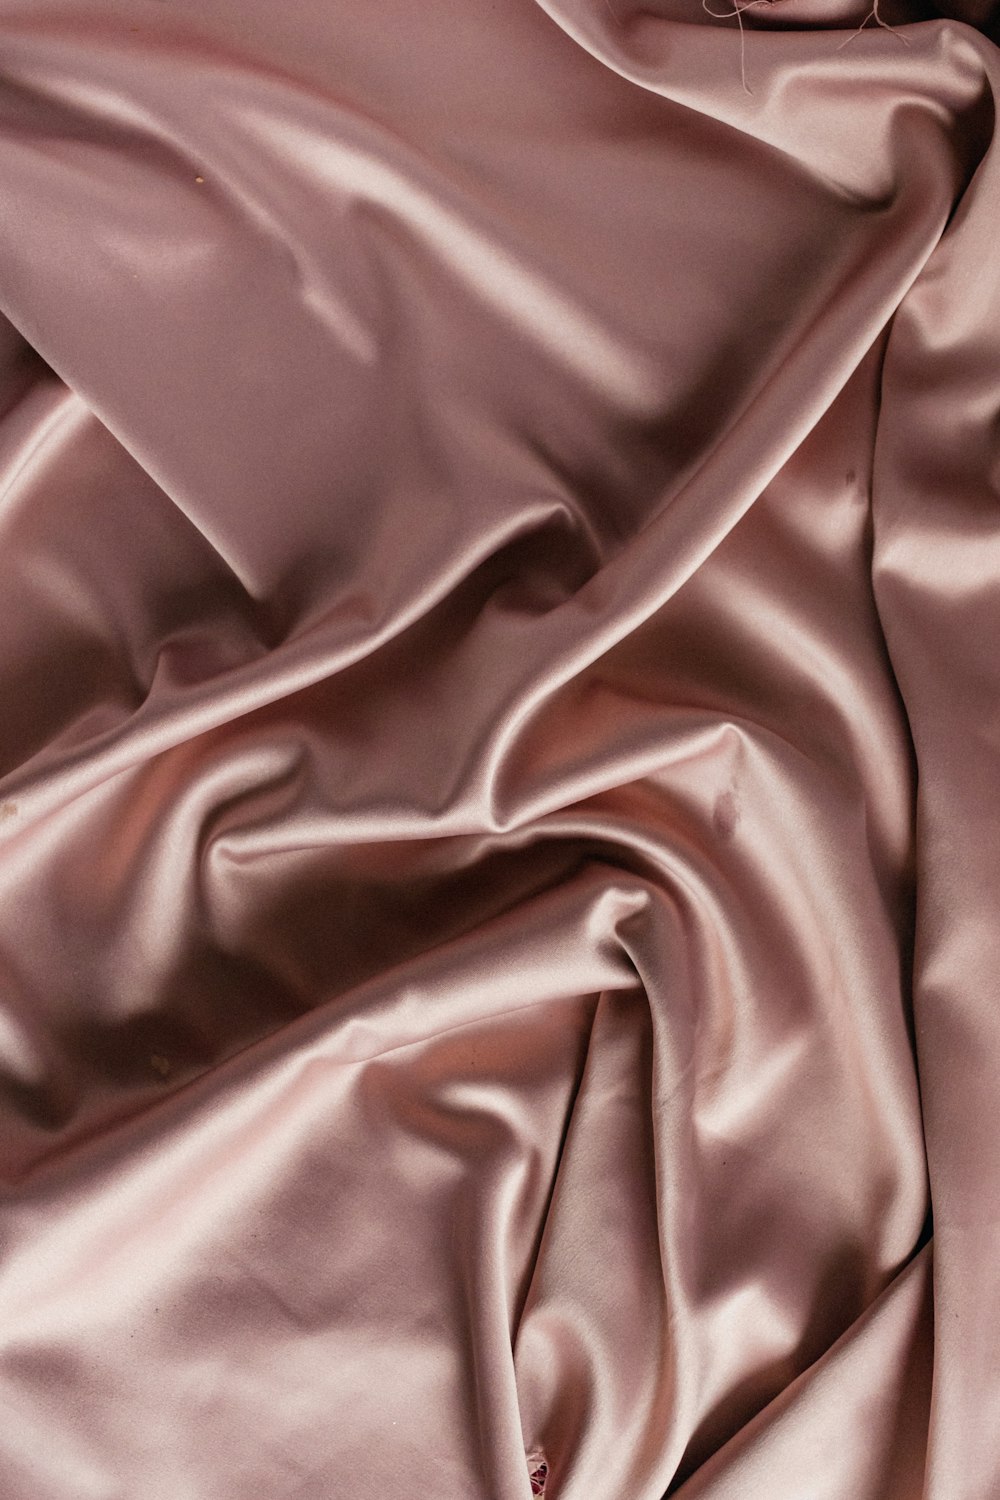 pink textile in close up photography